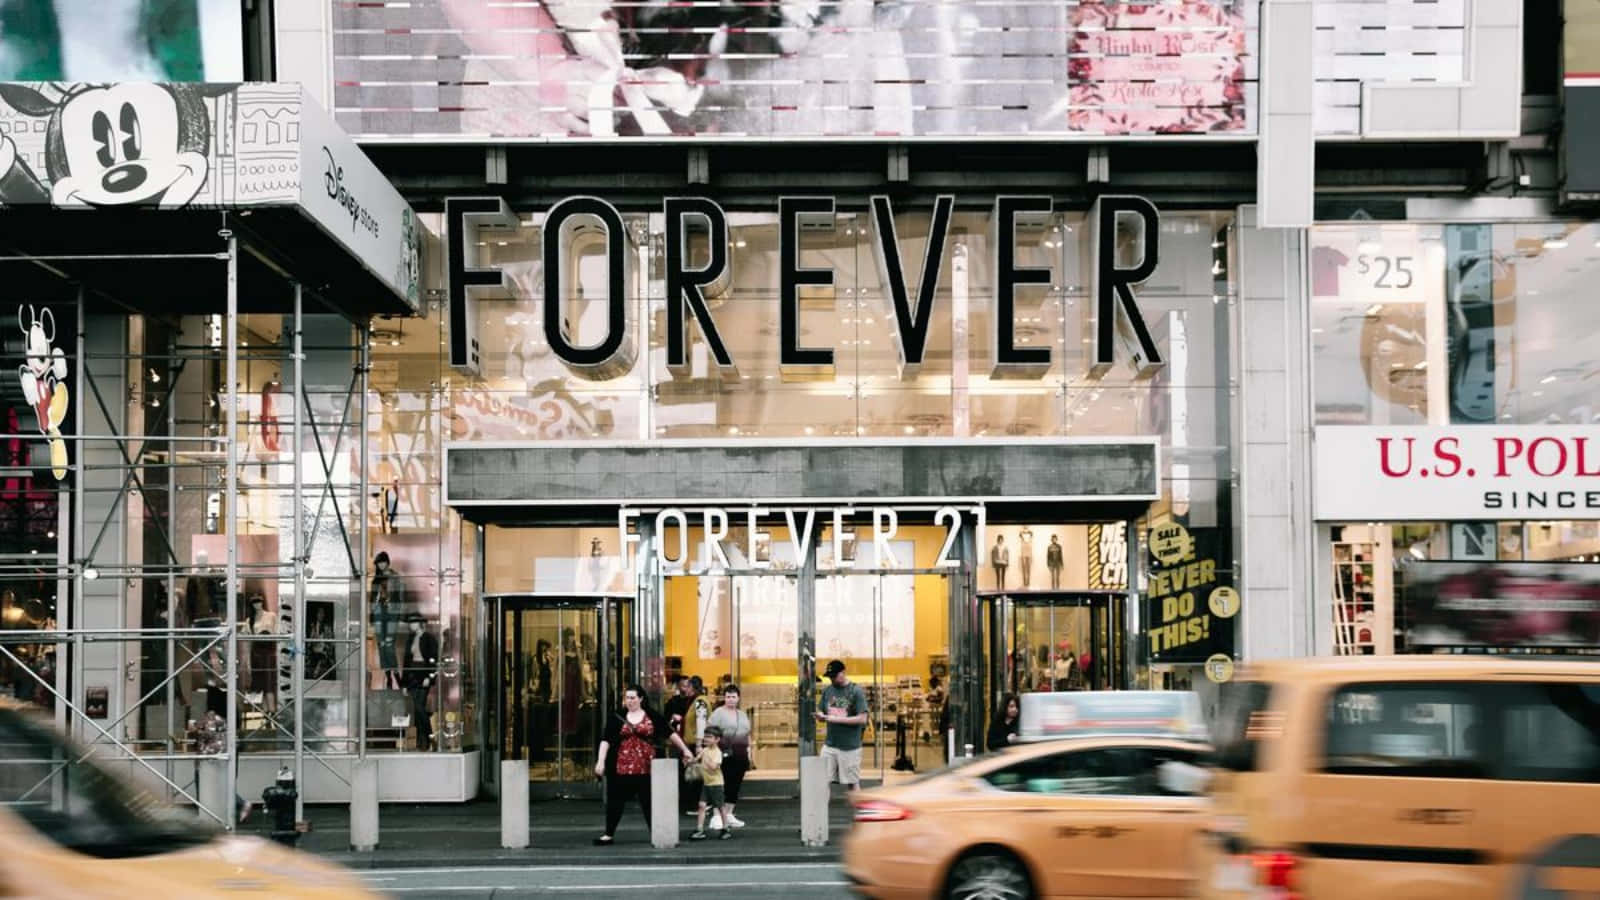 Welcome to the world of Forever 21!